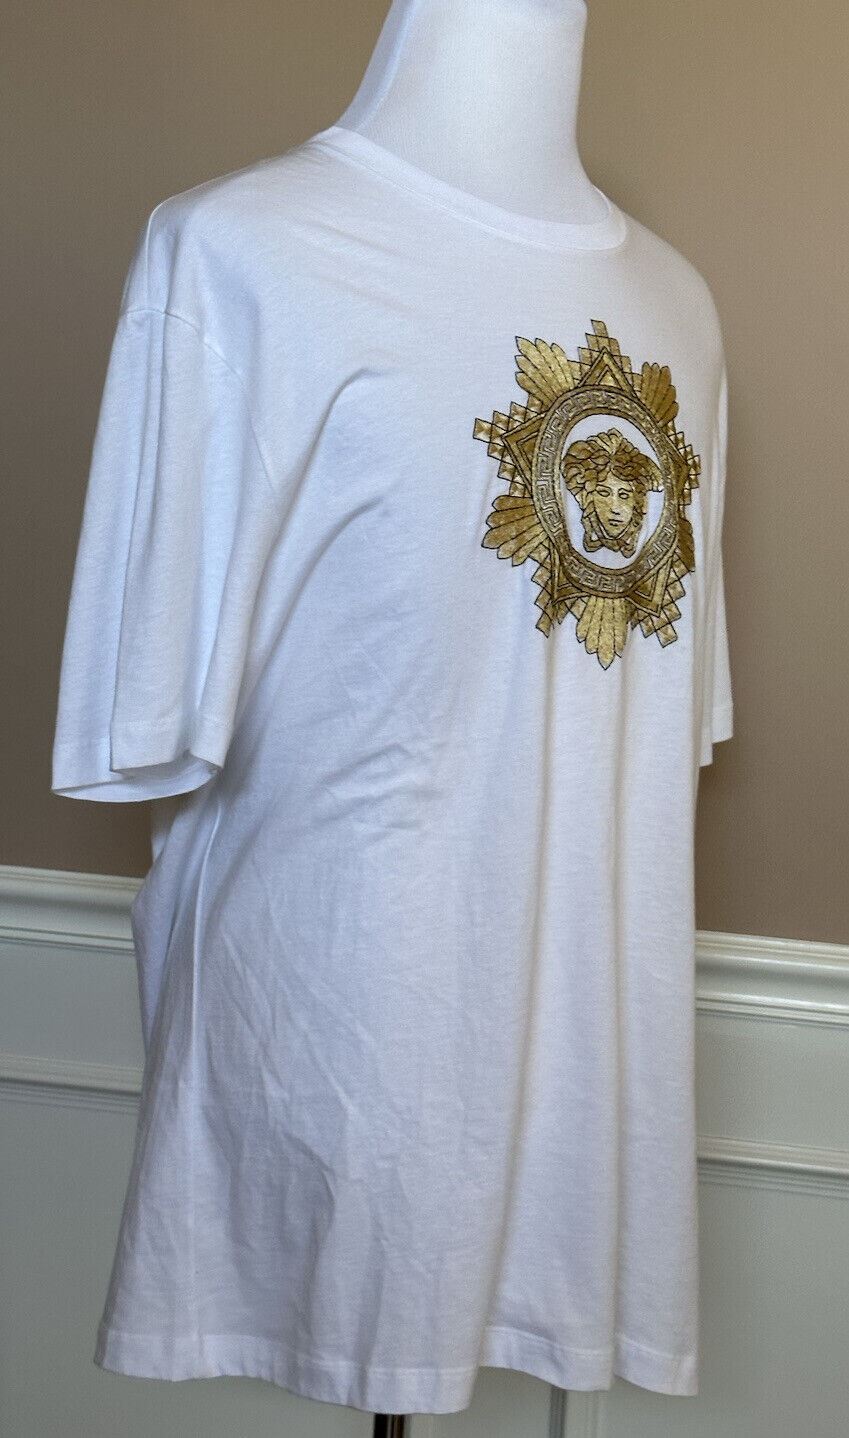 NWT $850 Versace Medusa Embroidery White Jersey T-Shirt 5XL A89499S Italy